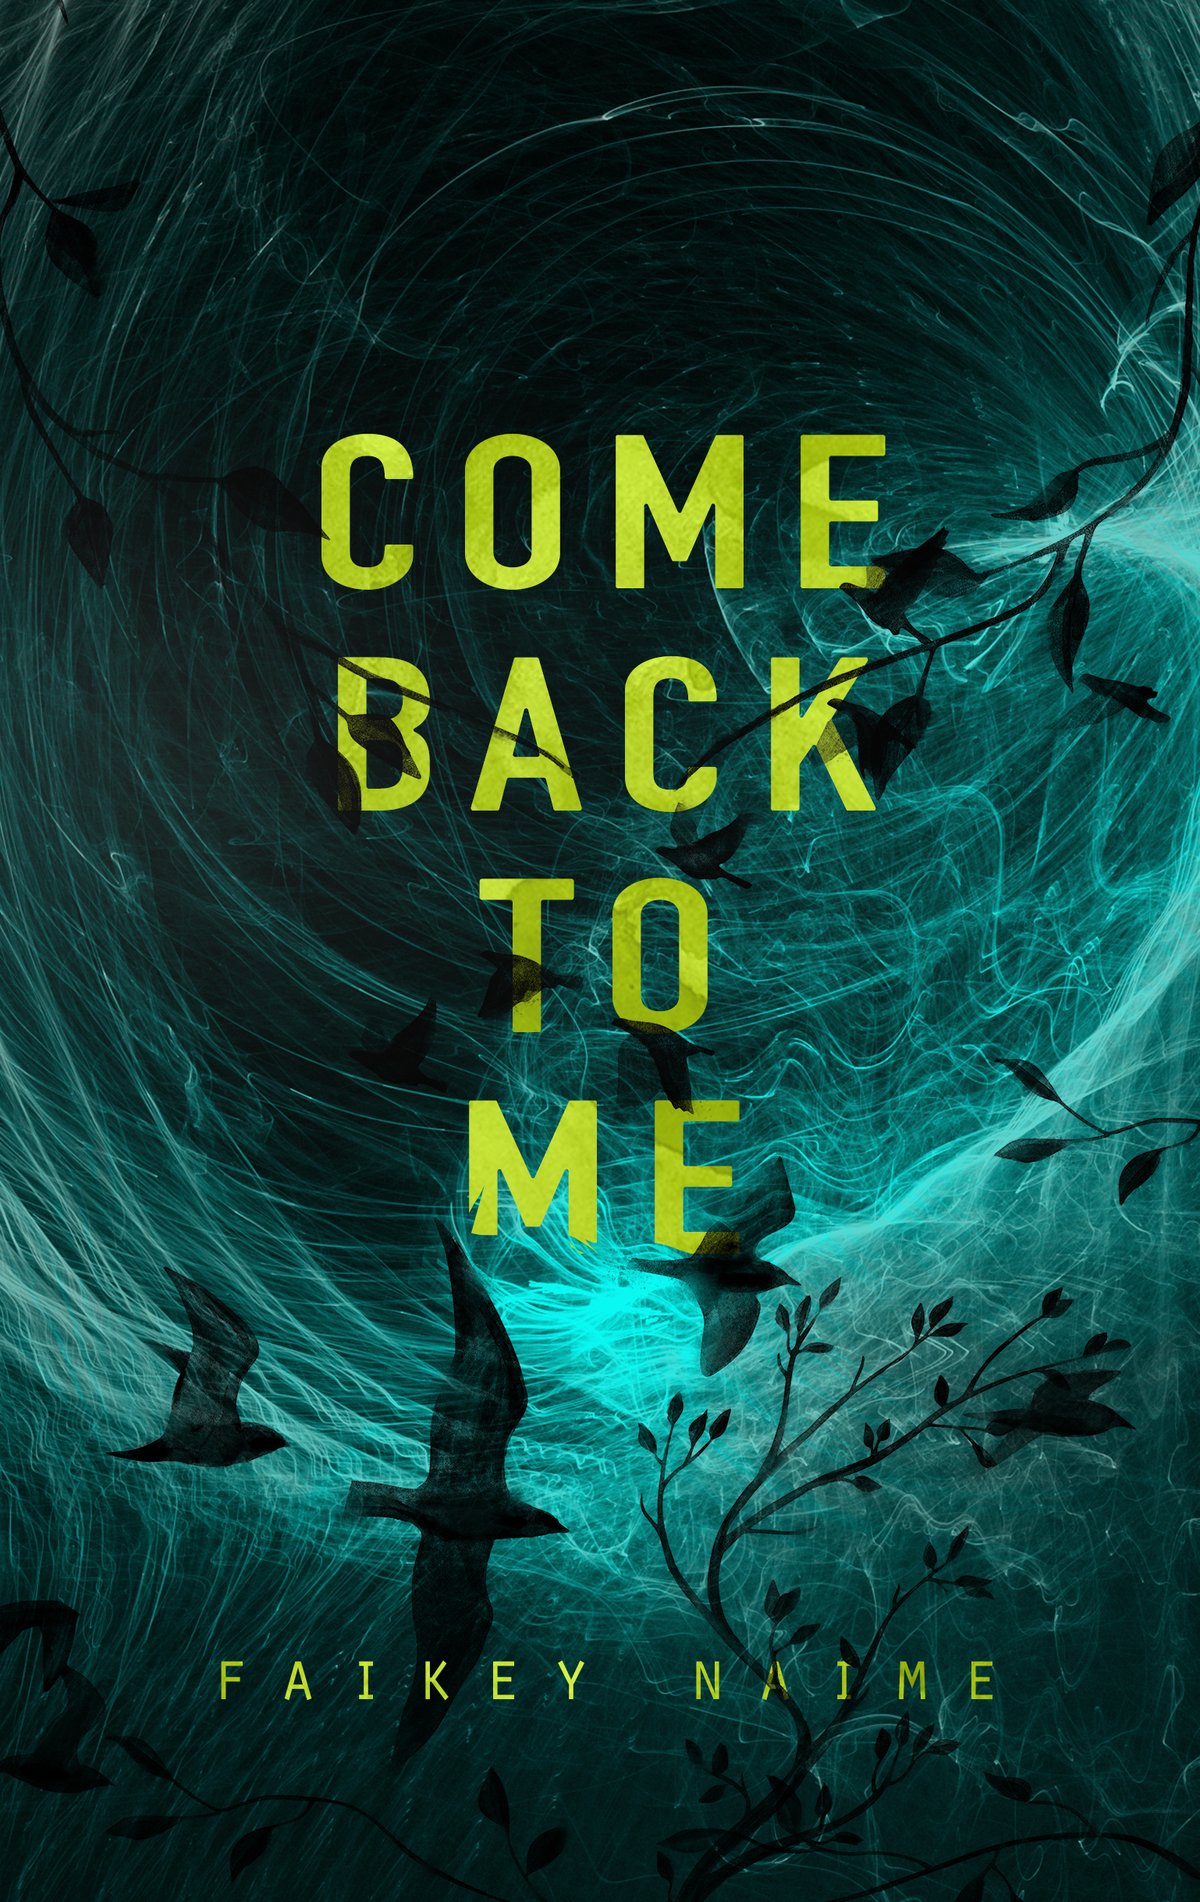 Image of "Come Back To Me" Pre-Made eBook Cover Design